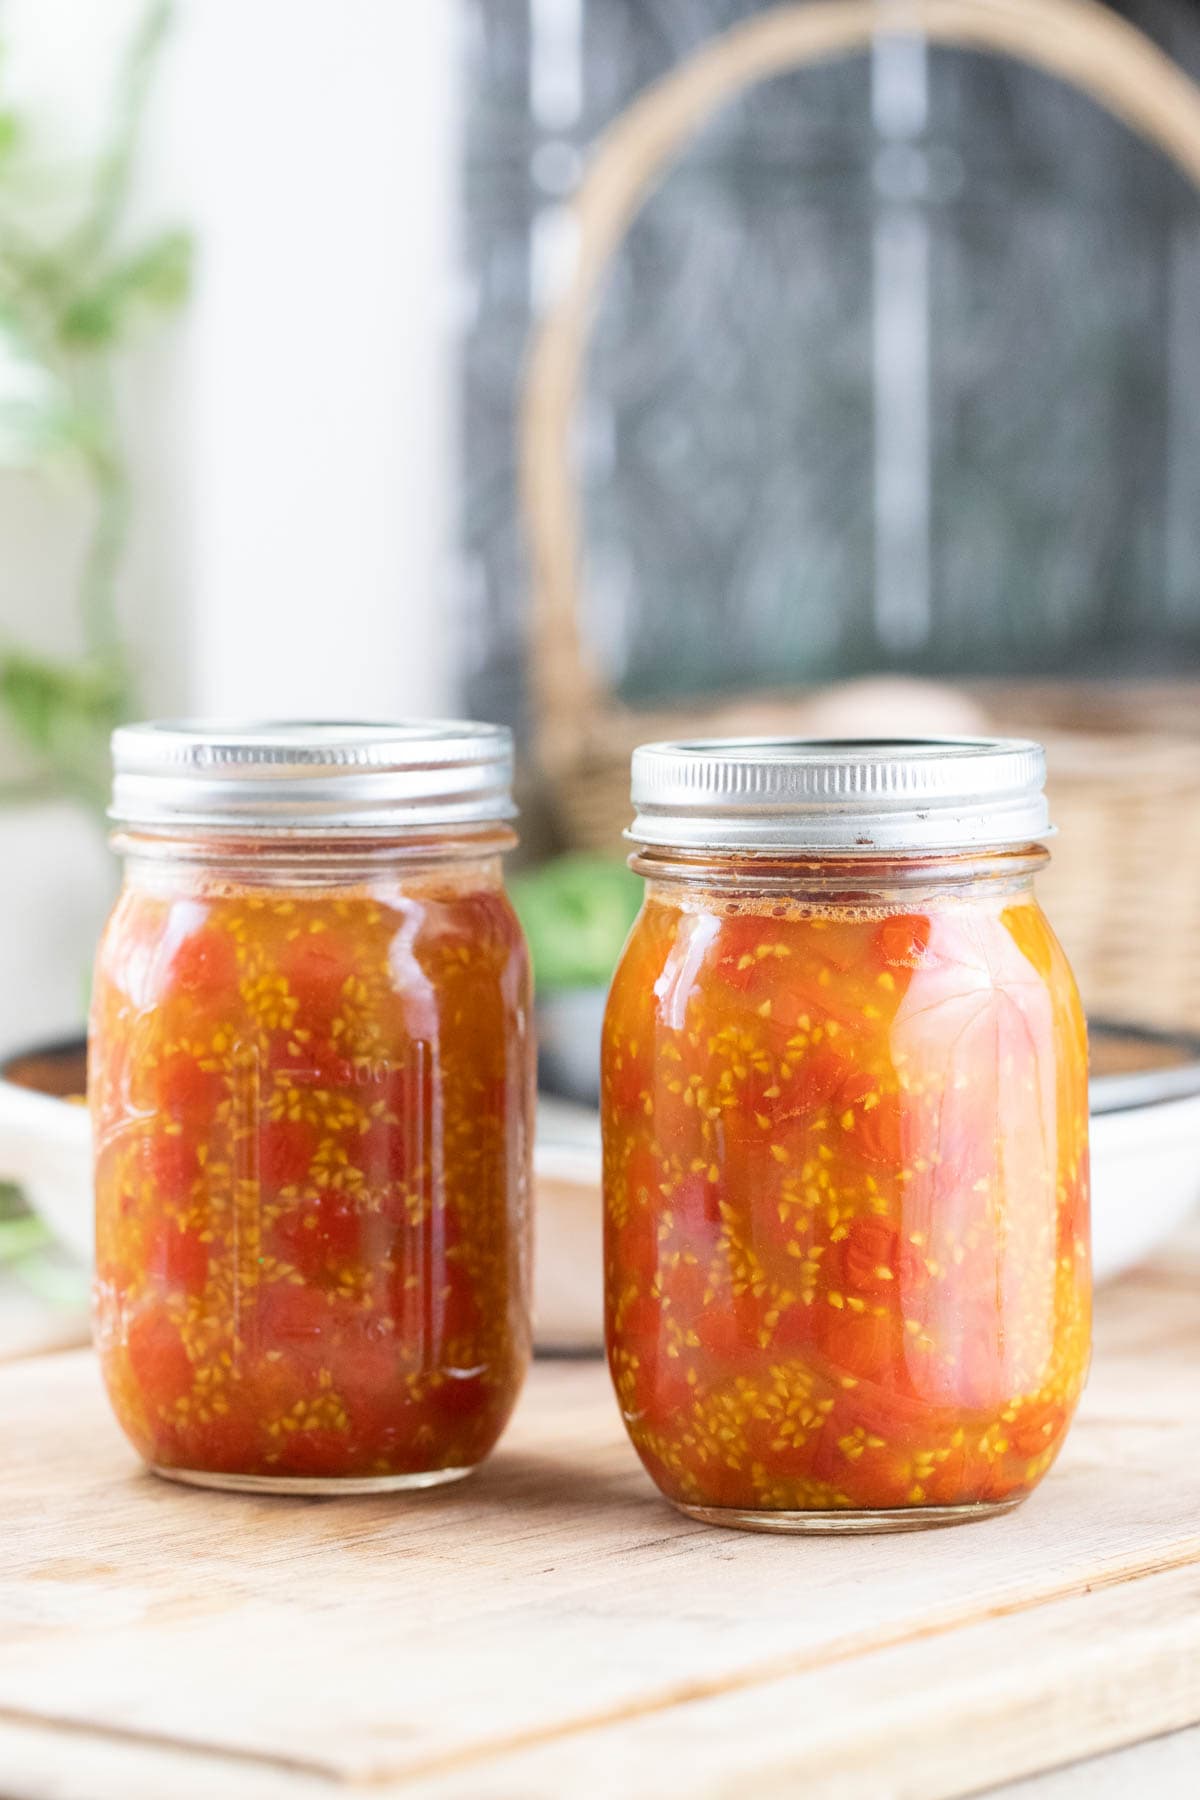 Packing jars with hot pack tomatoes.